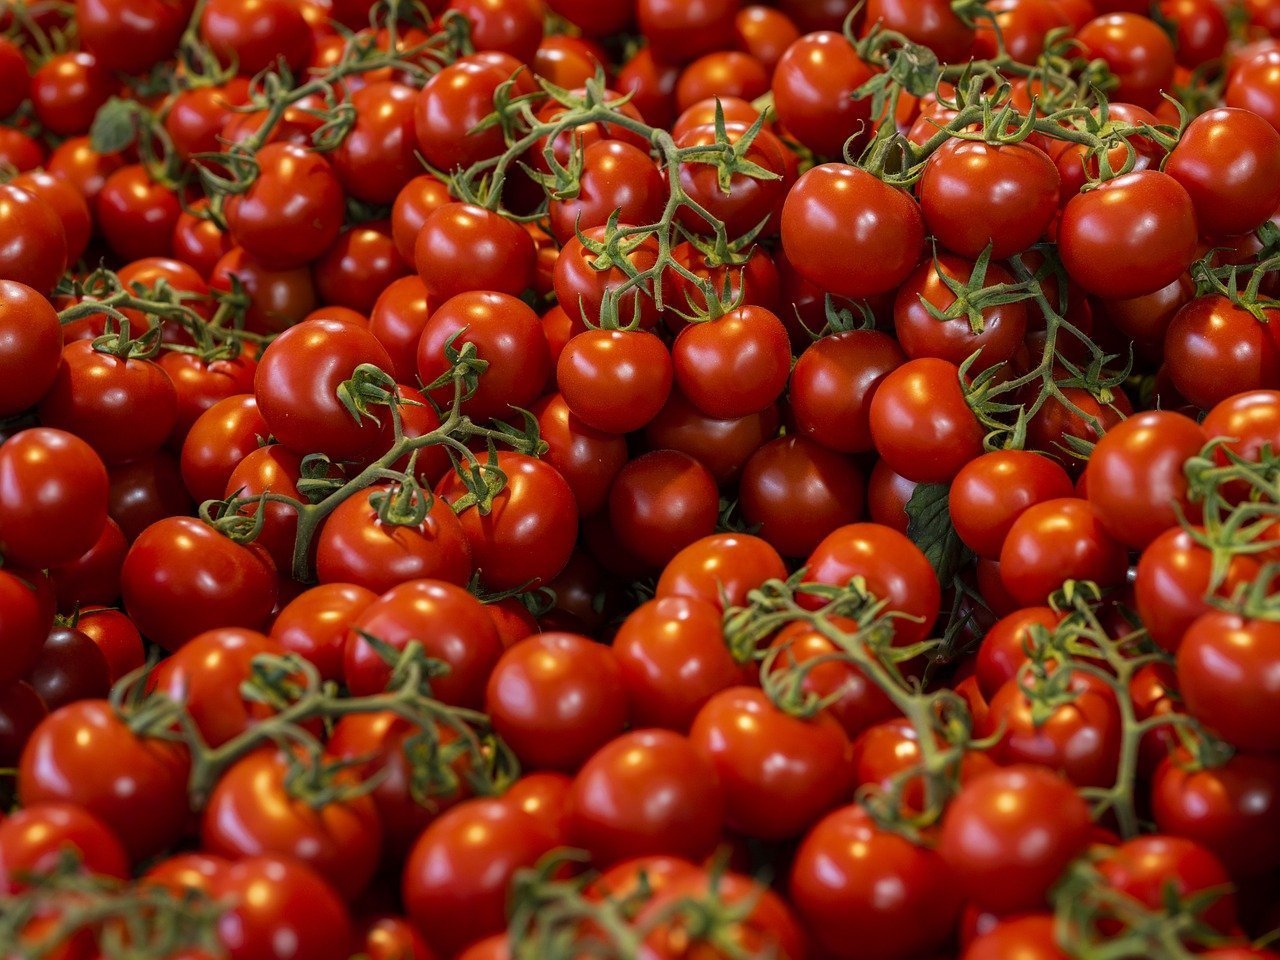 A large group of ripe, red tomatoes on the vine.